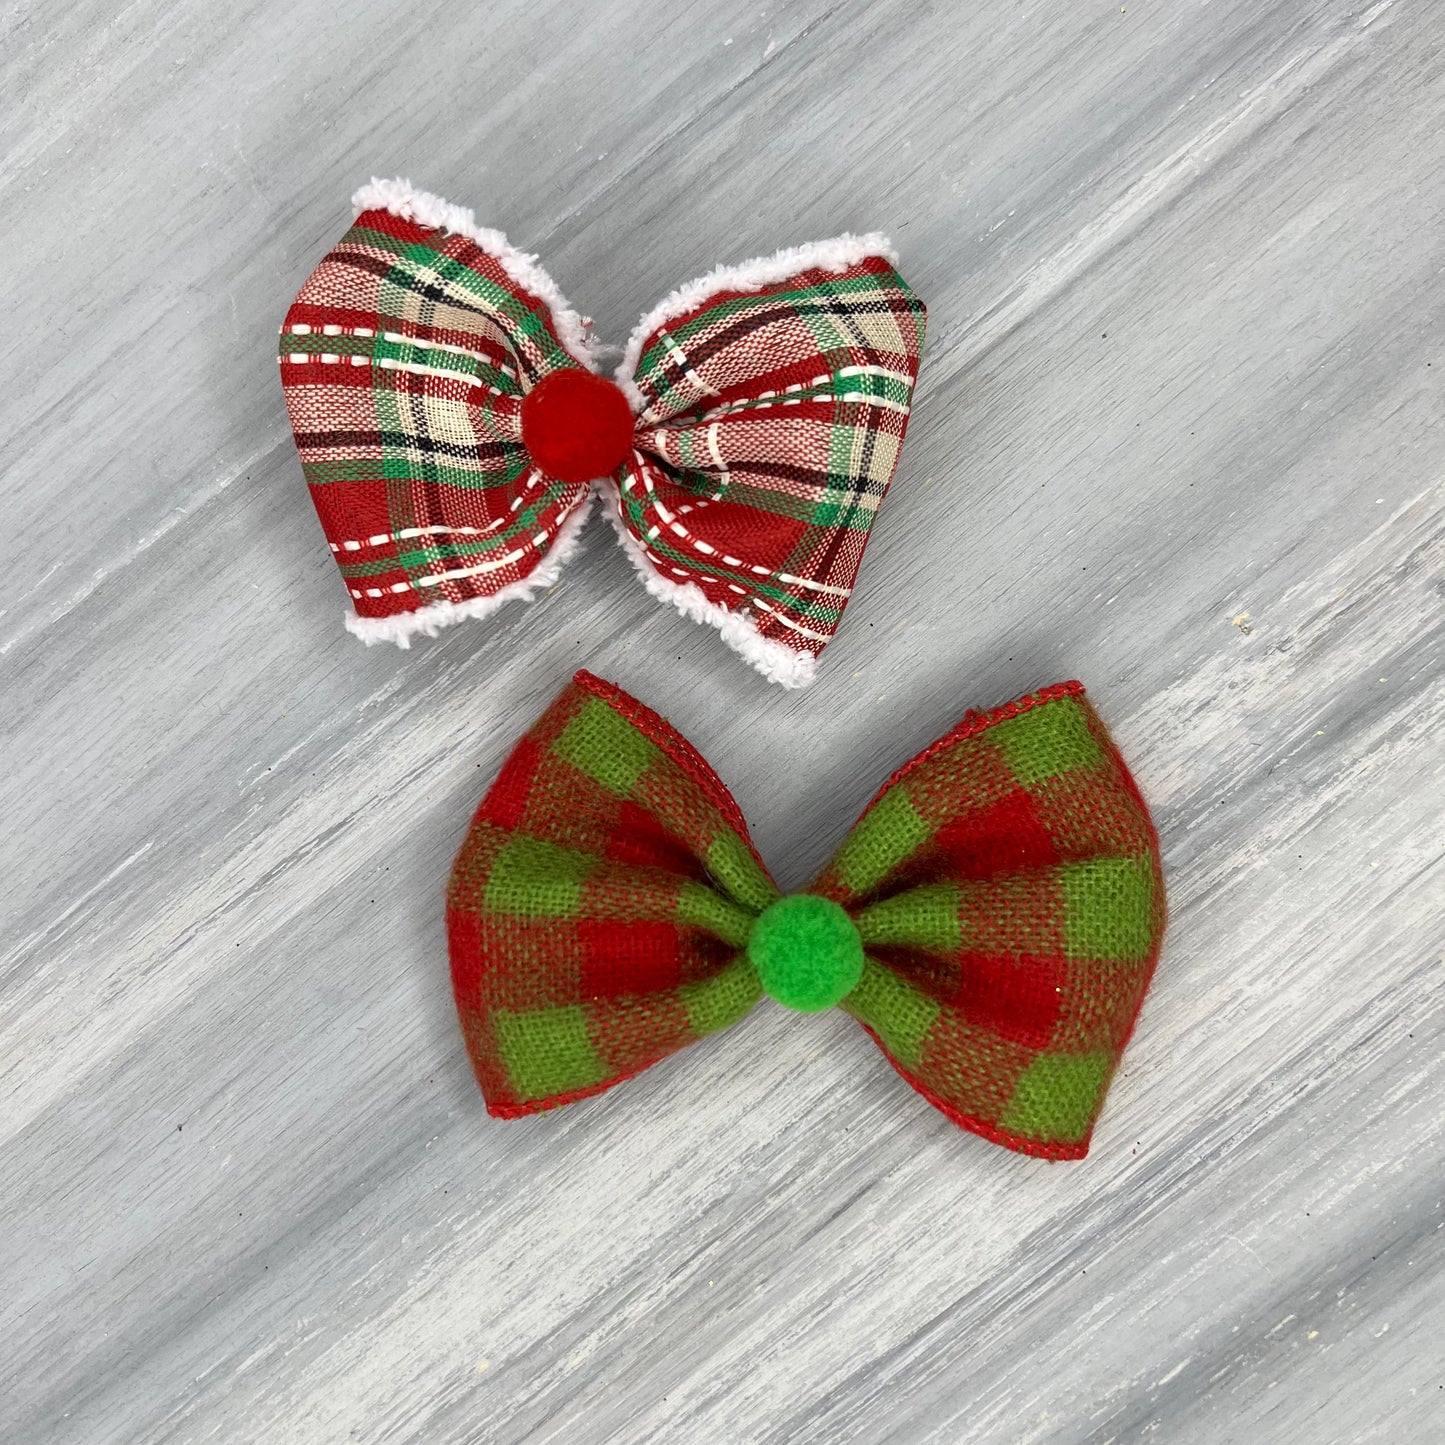 Fuzzy Flannel - Over the Top - 6 Large Bows